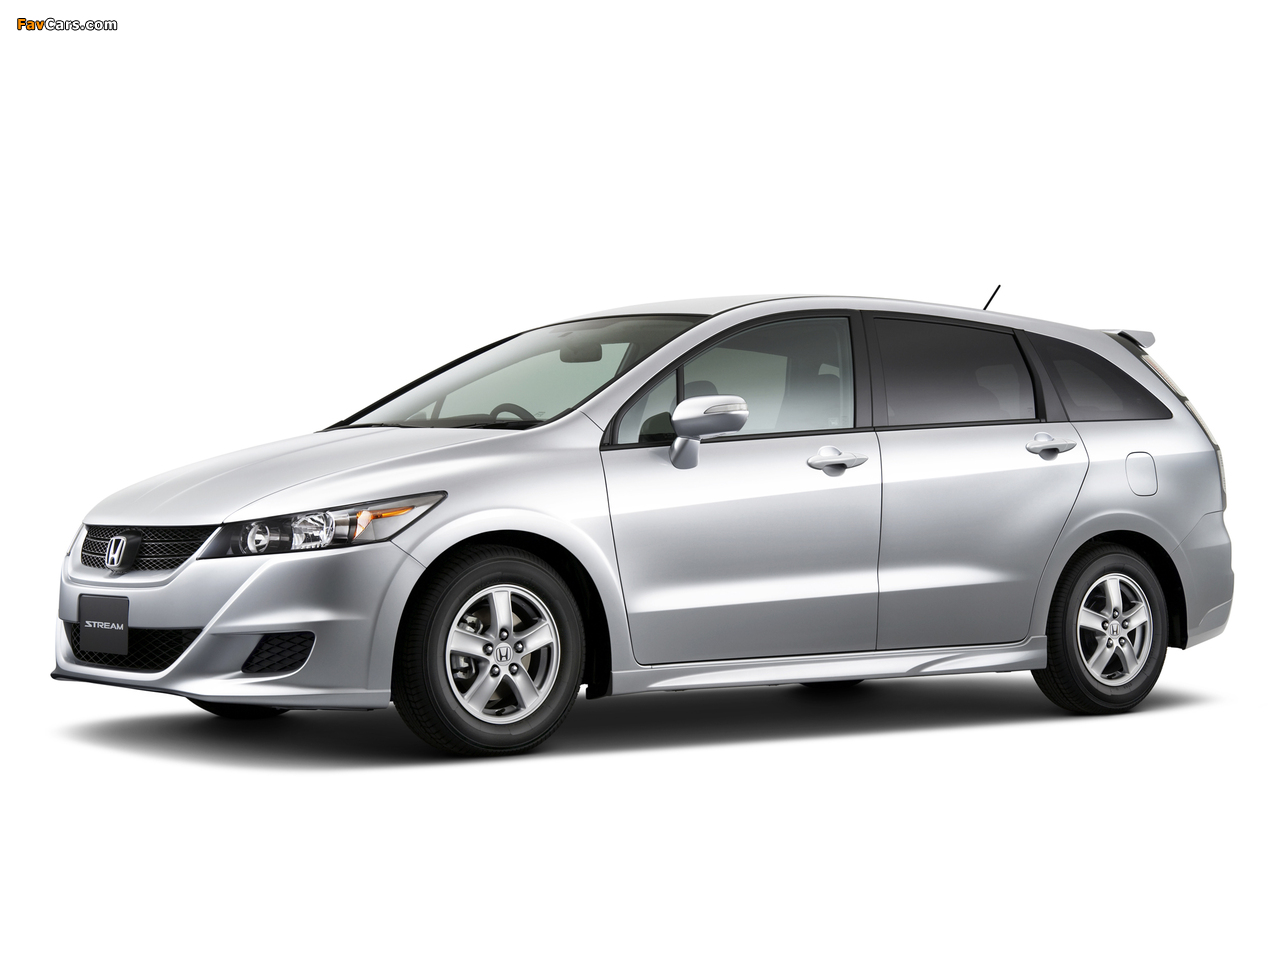 Honda Stream Sporty Edition (RN6) 2011 pictures (1280 x 960)